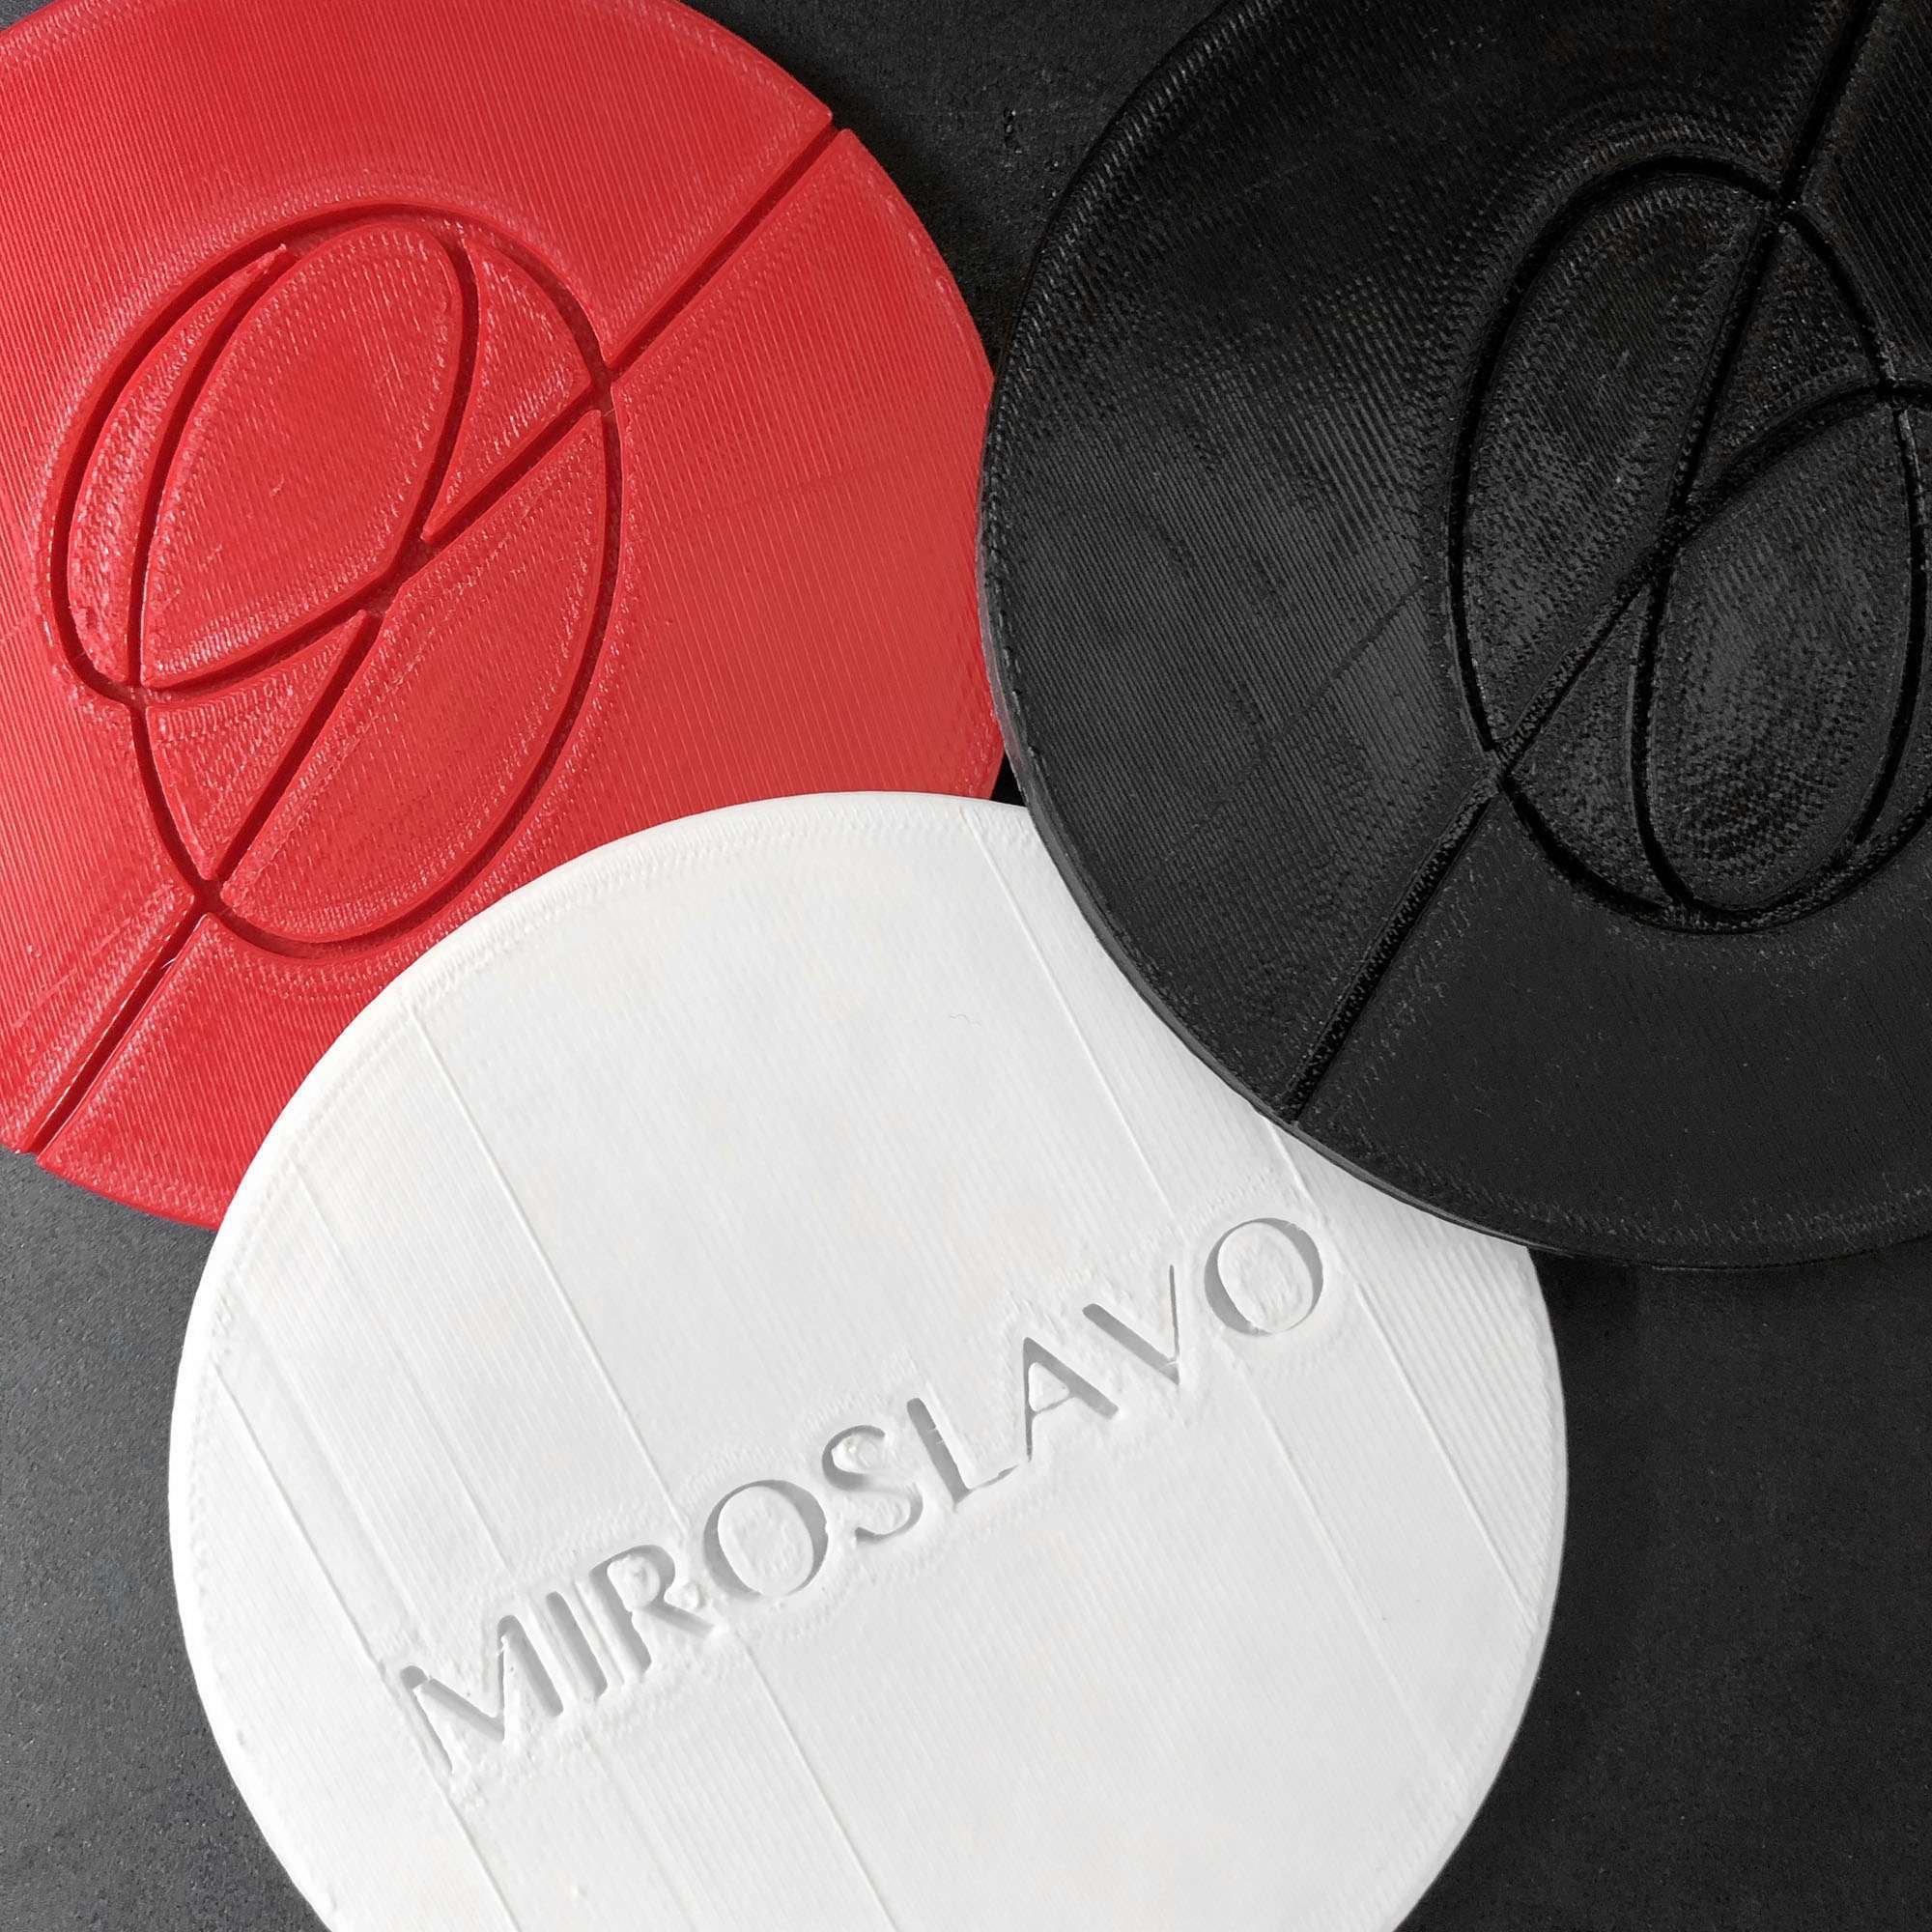 Miroslavo's R&D: Cup coaster with Miroslavo's Art